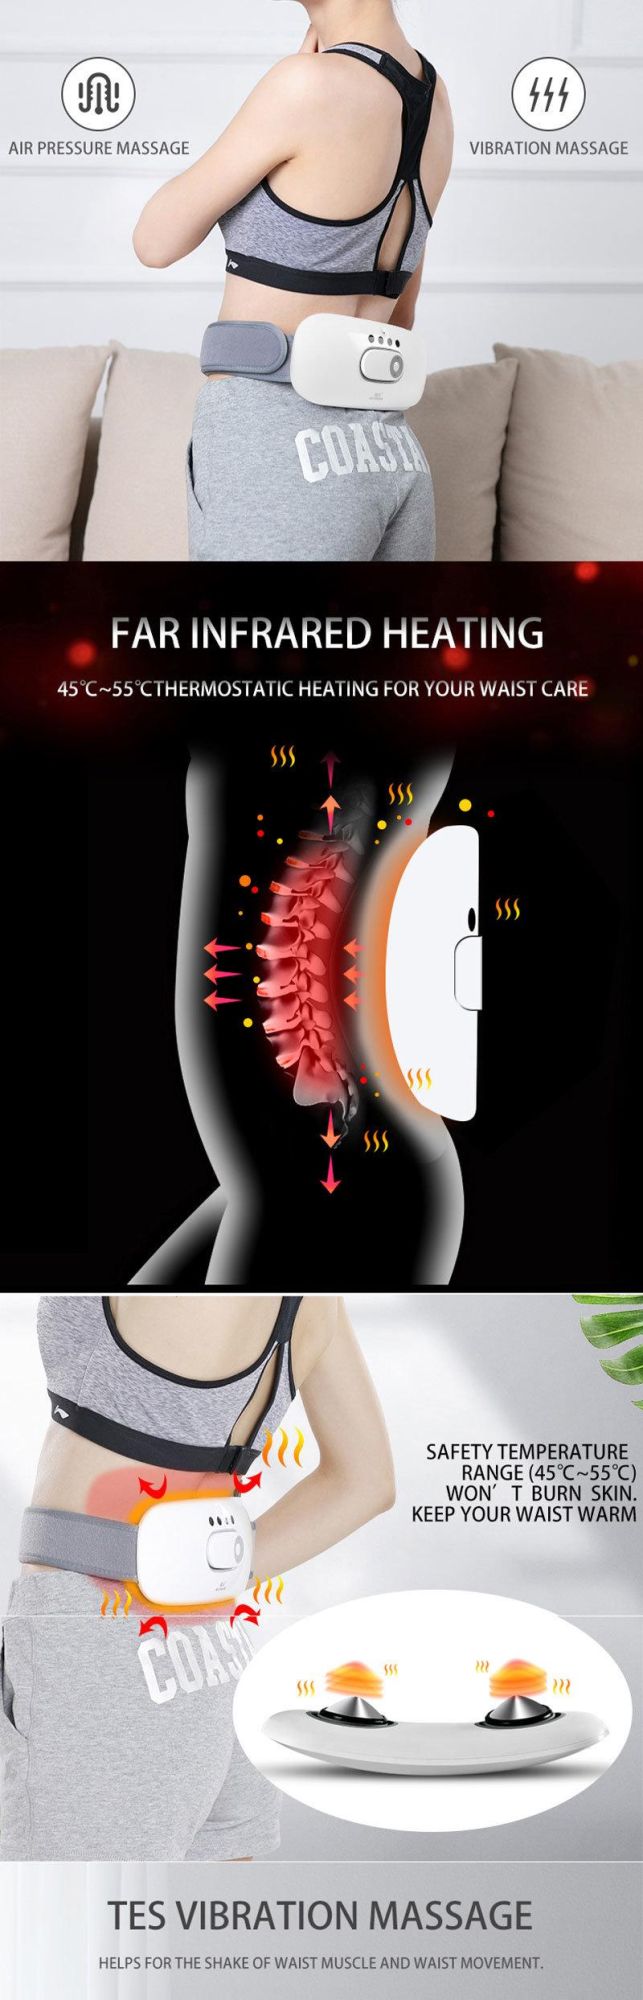 Hezheng Wholesale Self Waist Pain Massage Therapy High Quality Relieve Pain Back Massager Tool